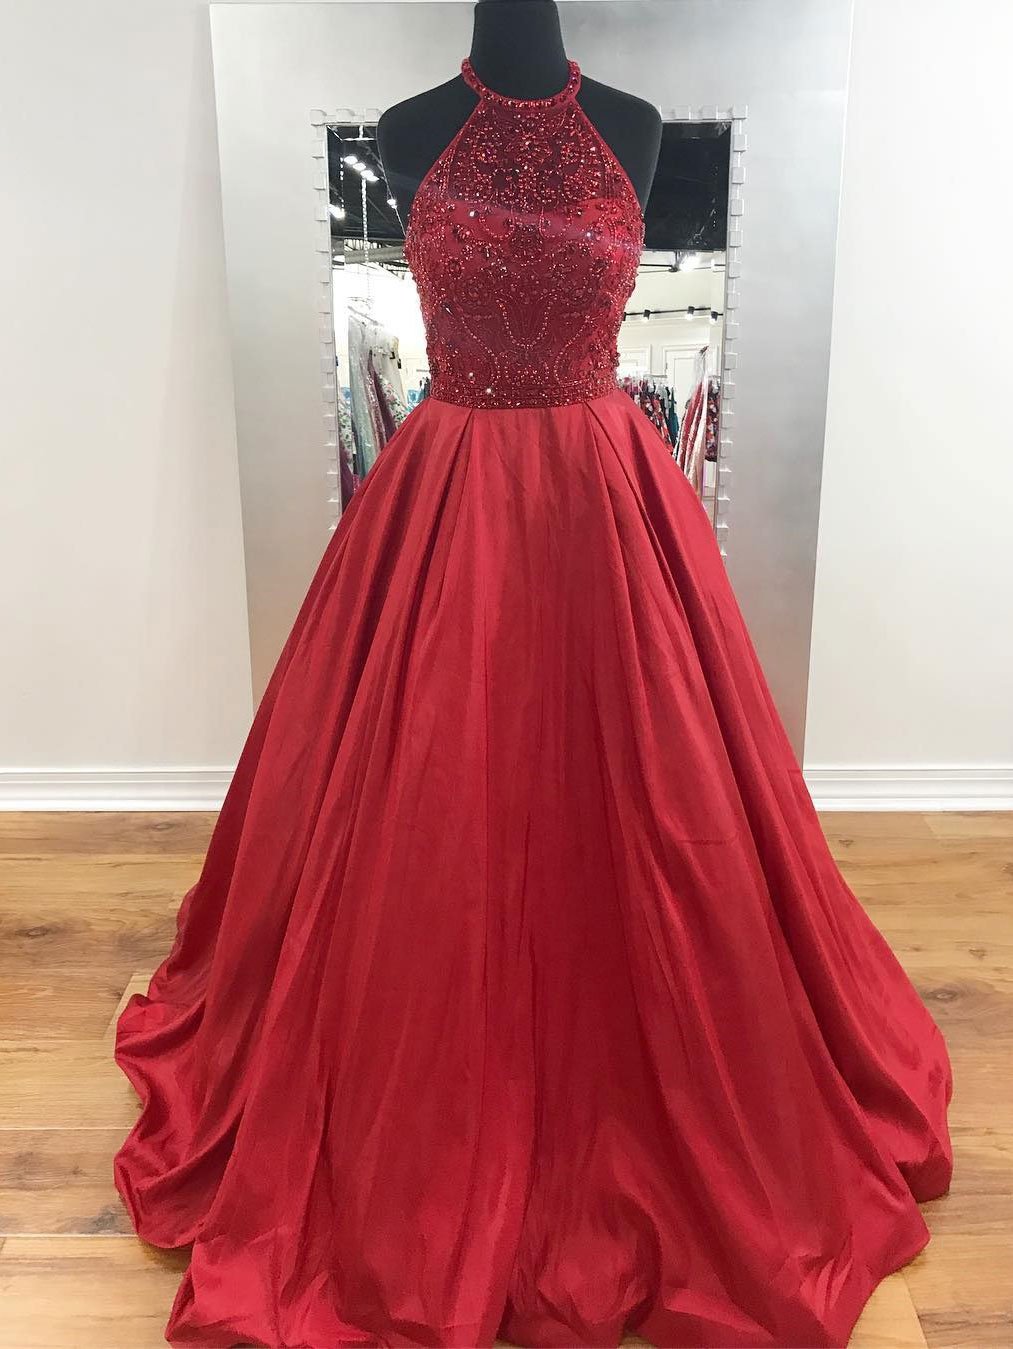 Red Satin Beaded Halter Prom Dresses Long A-line Evening Dresses Sexy Formal Gowns Party Graduation Dress For Women